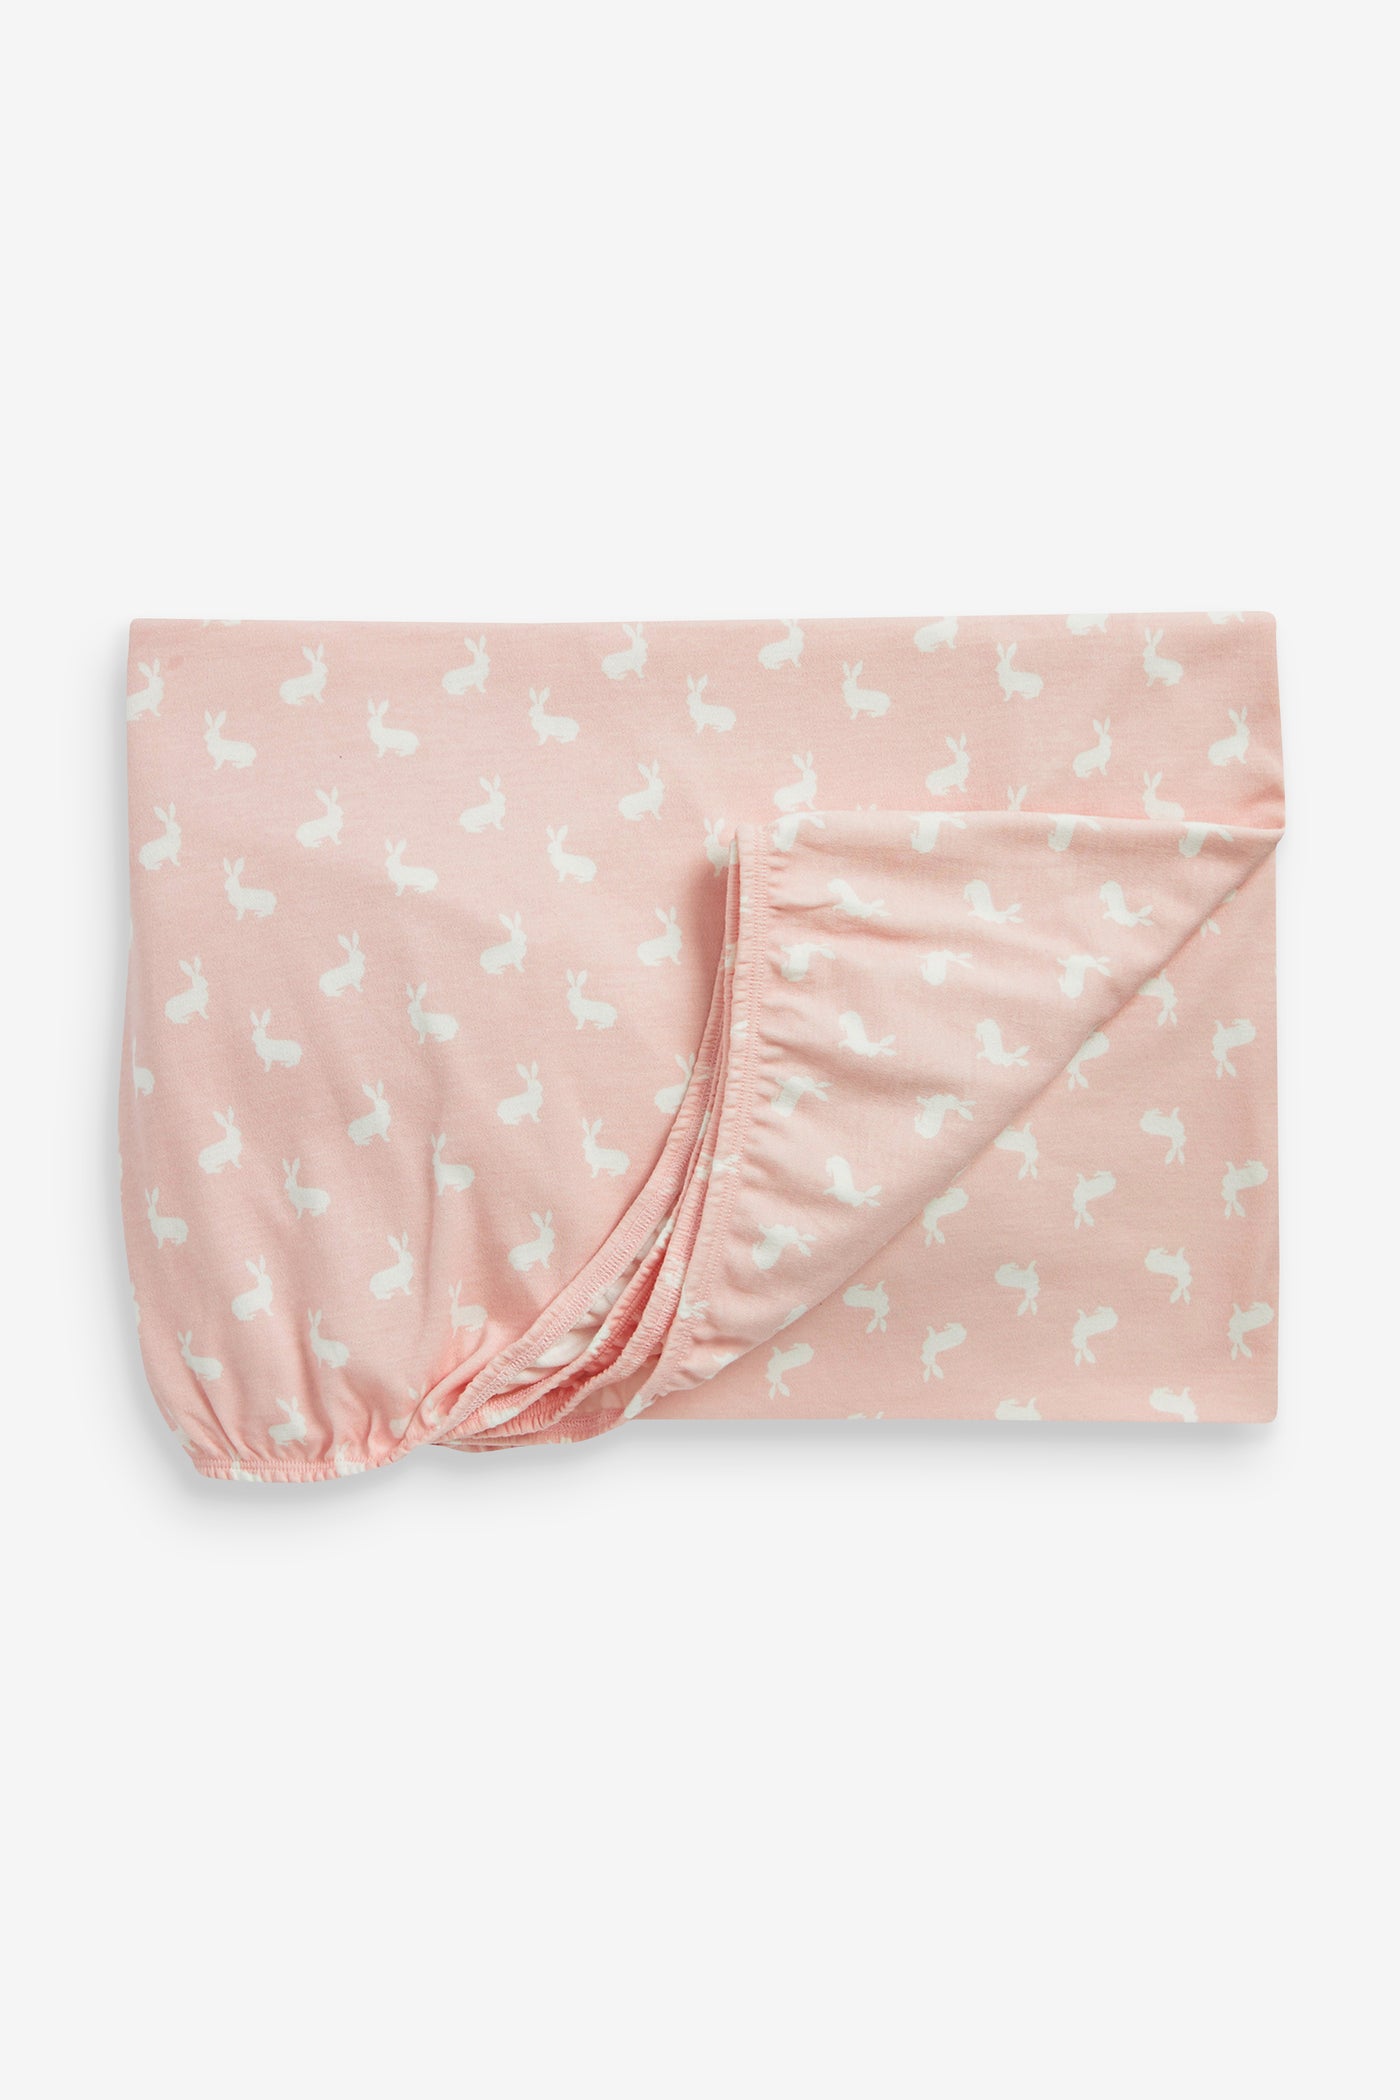 2pk Fitted Jersey Cot Sheet, rose pink woodland and rose pink hare print